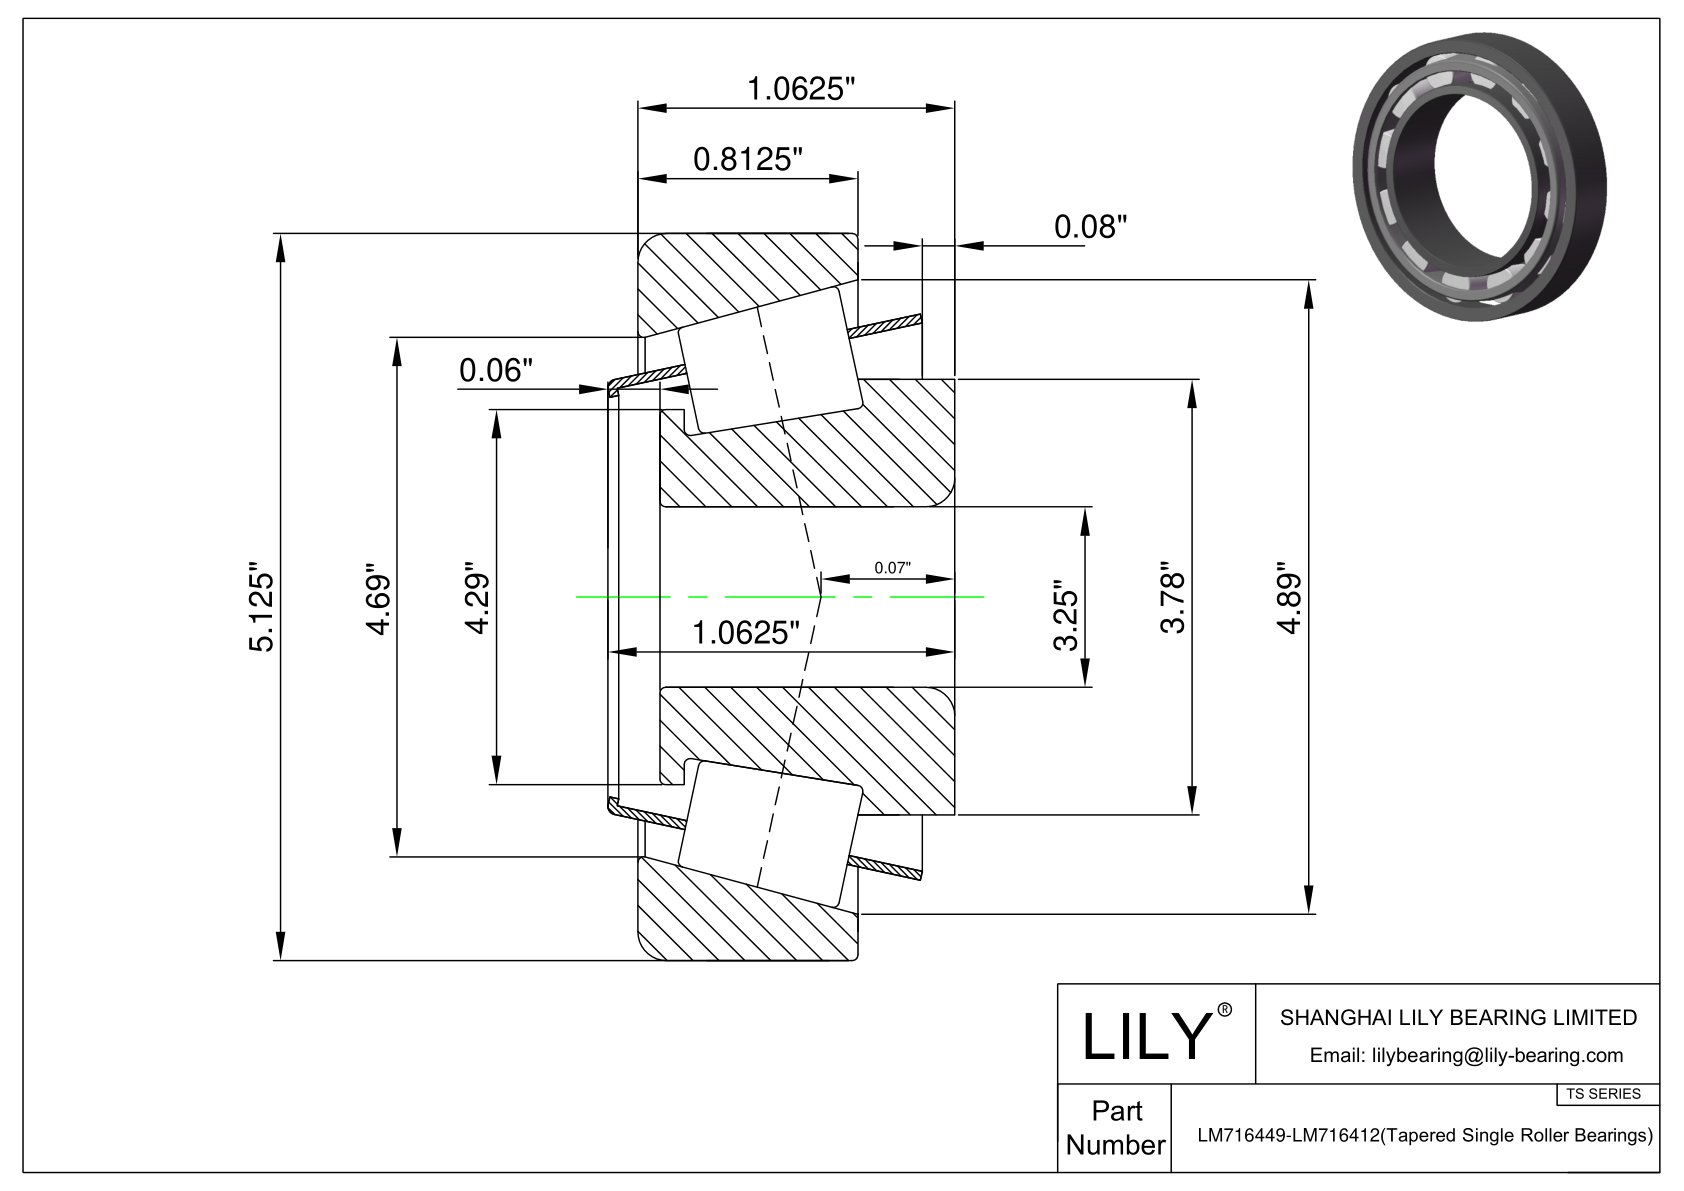 LM716449-LM716412 TS (Tapered Single Roller Bearings) (Imperial) cad drawing